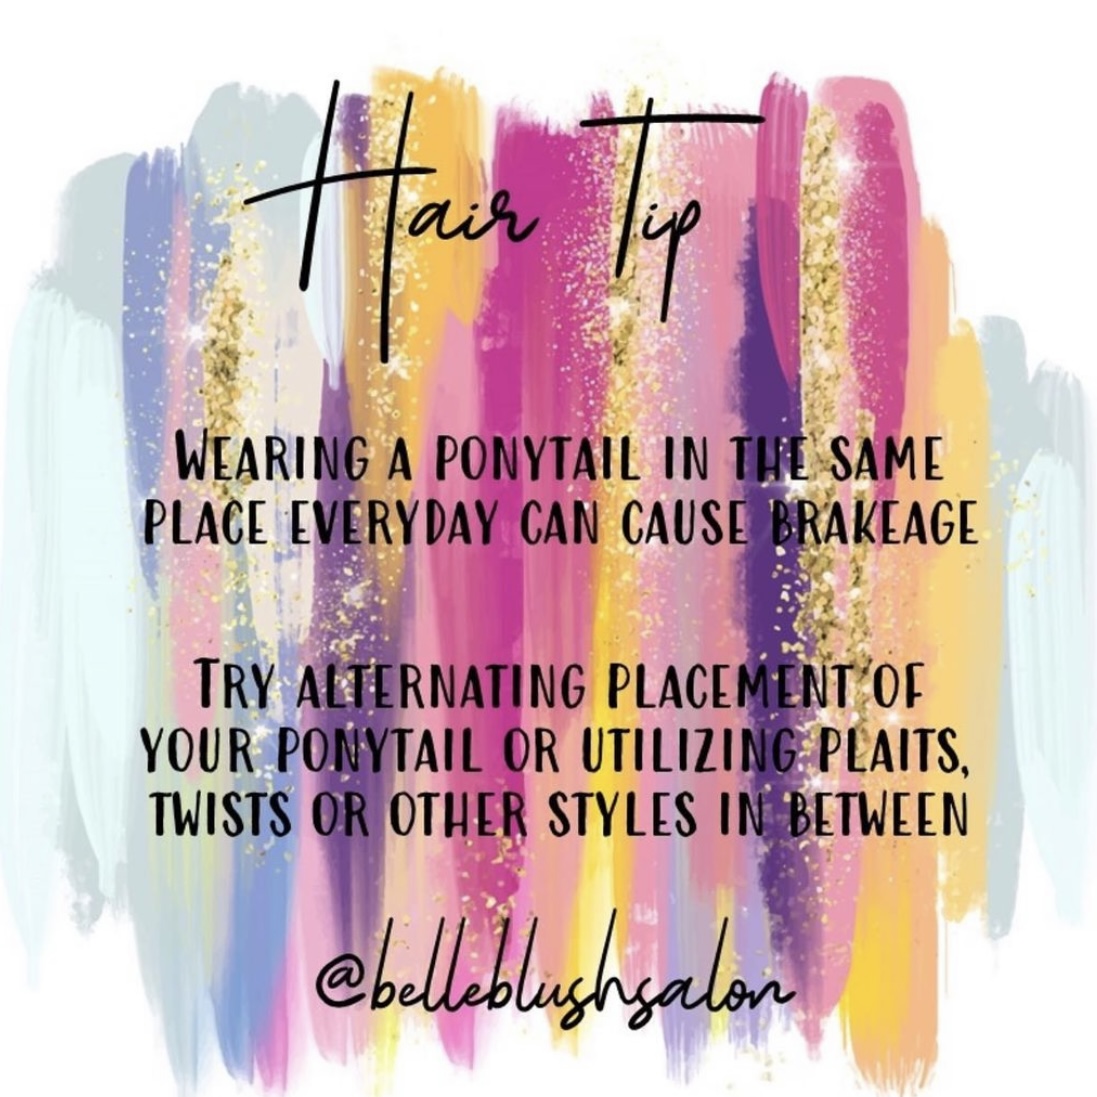 Here's another helpful hair tip from Belle Blush ✨

Did you know this? We certainly didn't!

#peterborough #rivergatesc #haircare #hairtip #hairdresser #belleblushsalon #hairinspo #hairtips #hairroutine